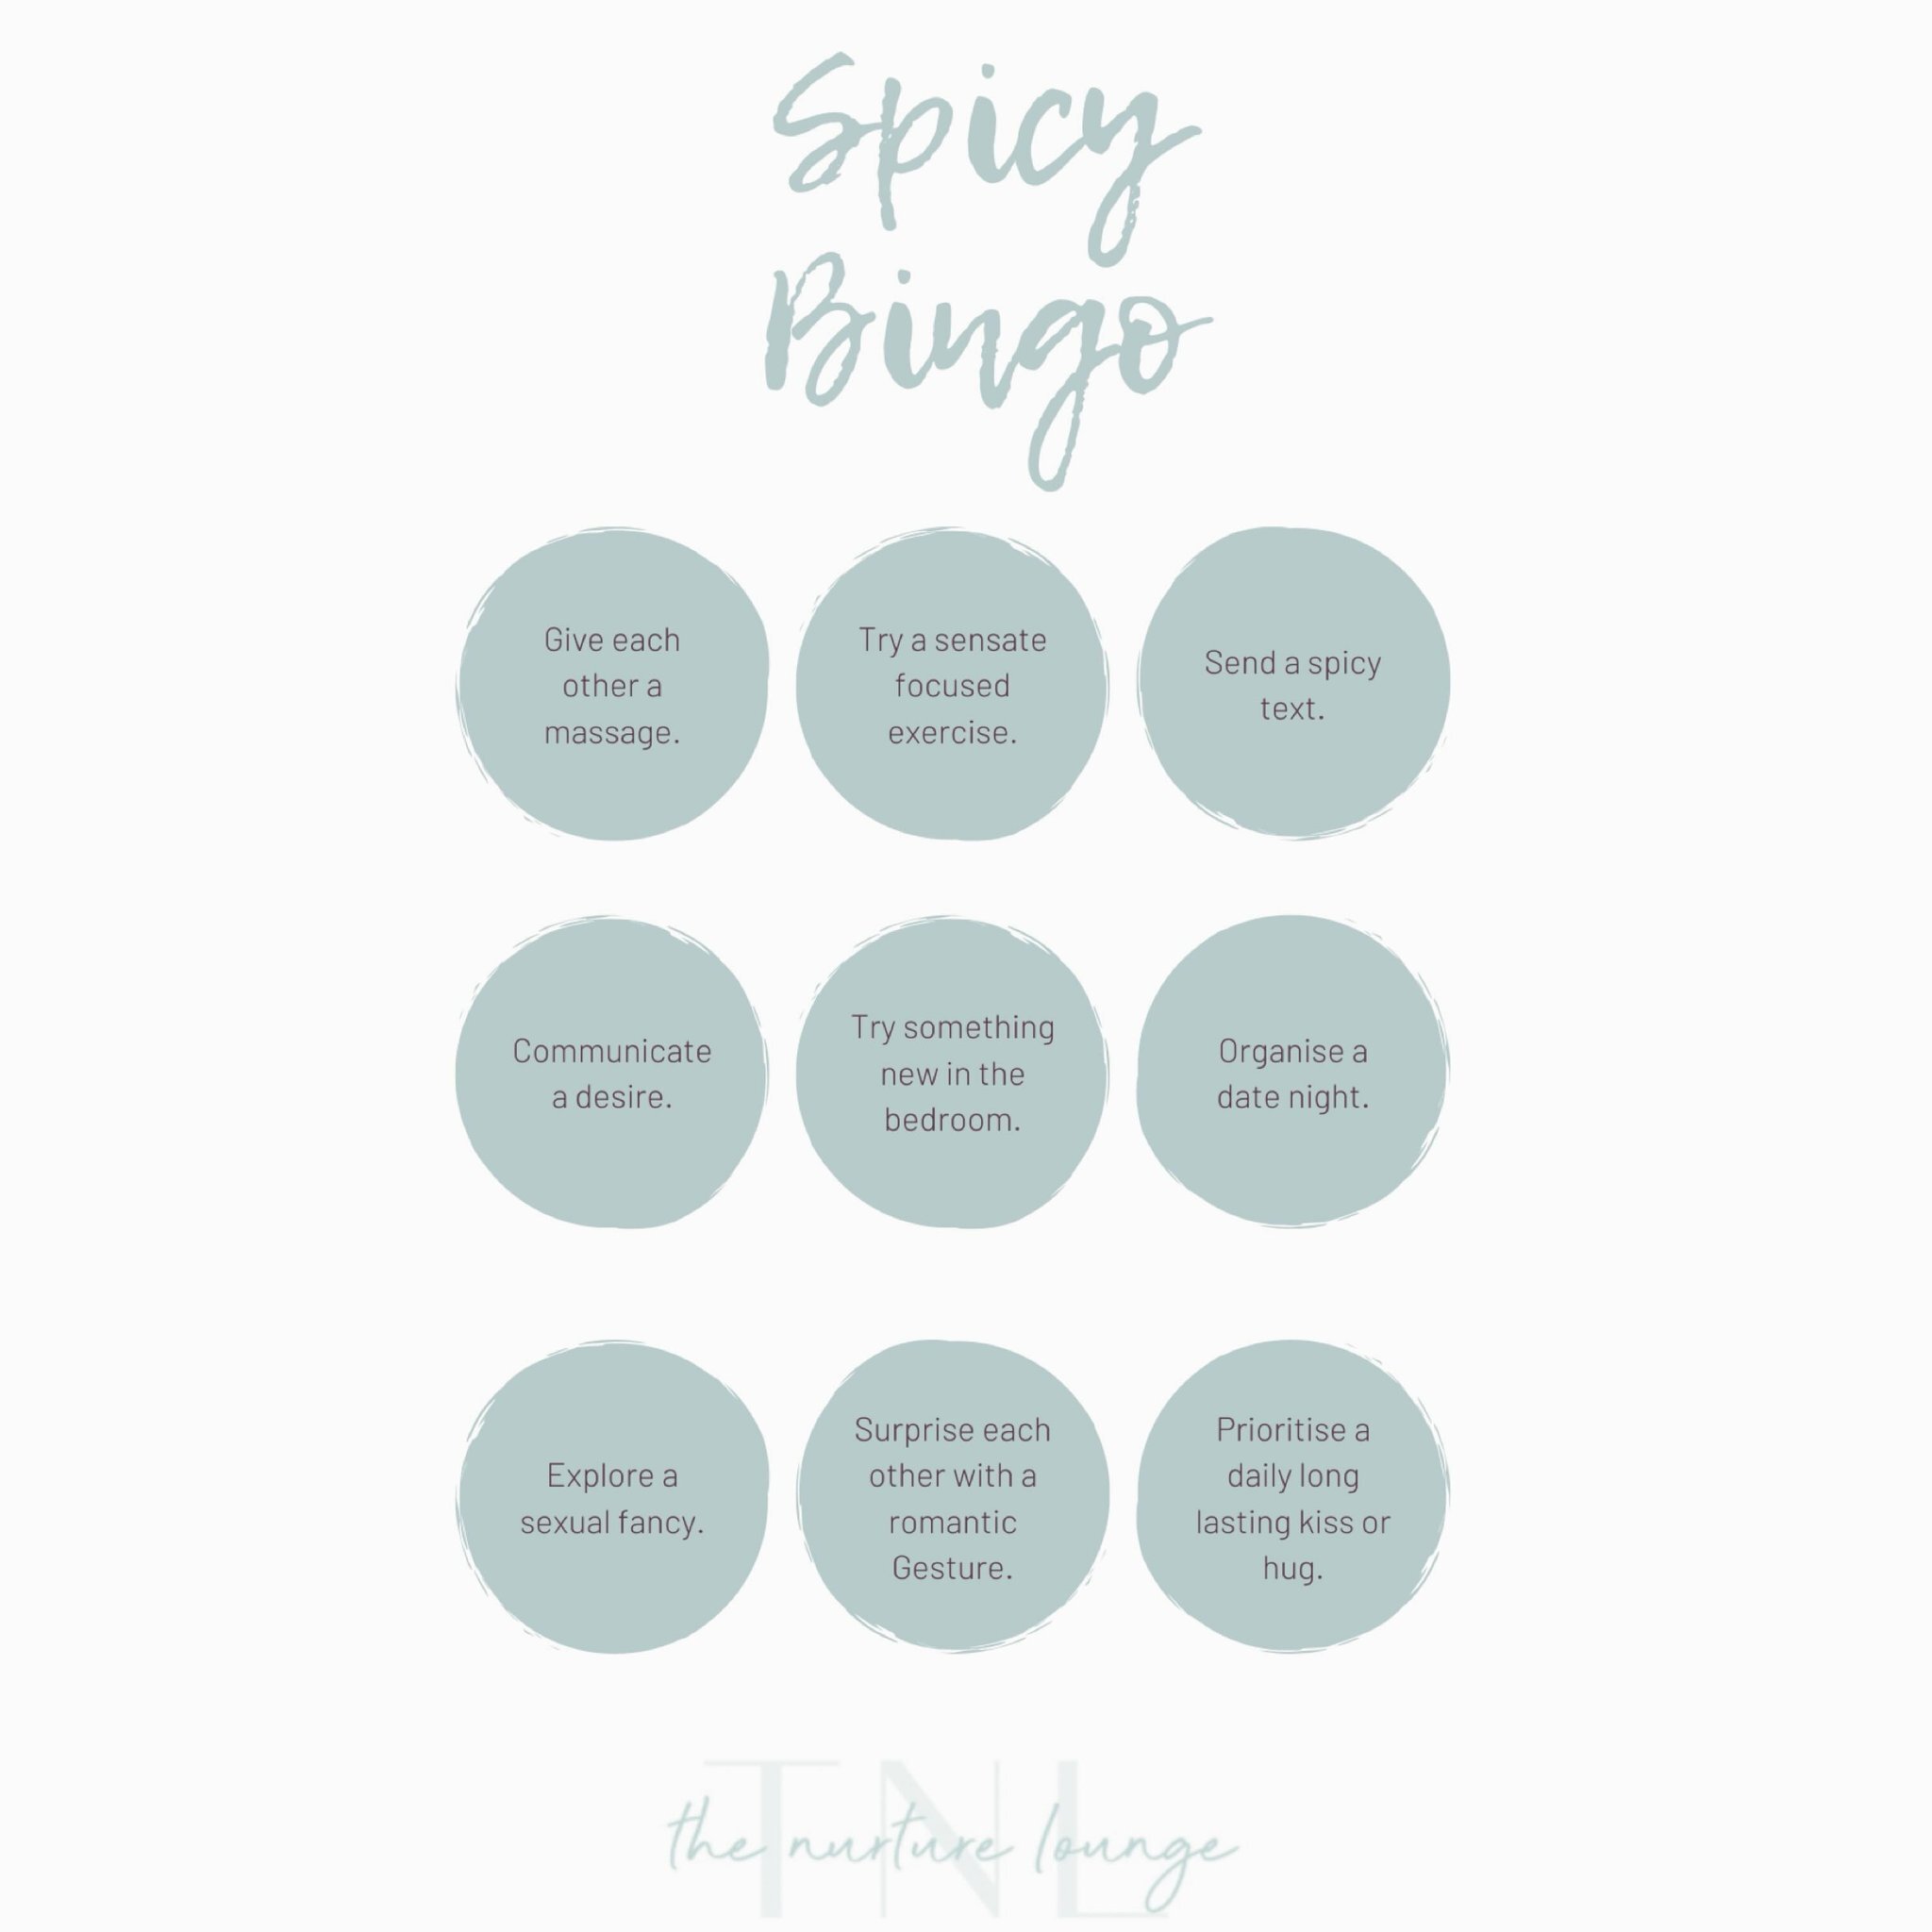 | Spicy Bingo 🌶️ |

We have a new proposal for you from our psychologist.
With a new month about to start &amp; an extra long weekend to look forward too. 
We challenge you &amp; your partner to save this for later.
Playing Bingo together is a fun w